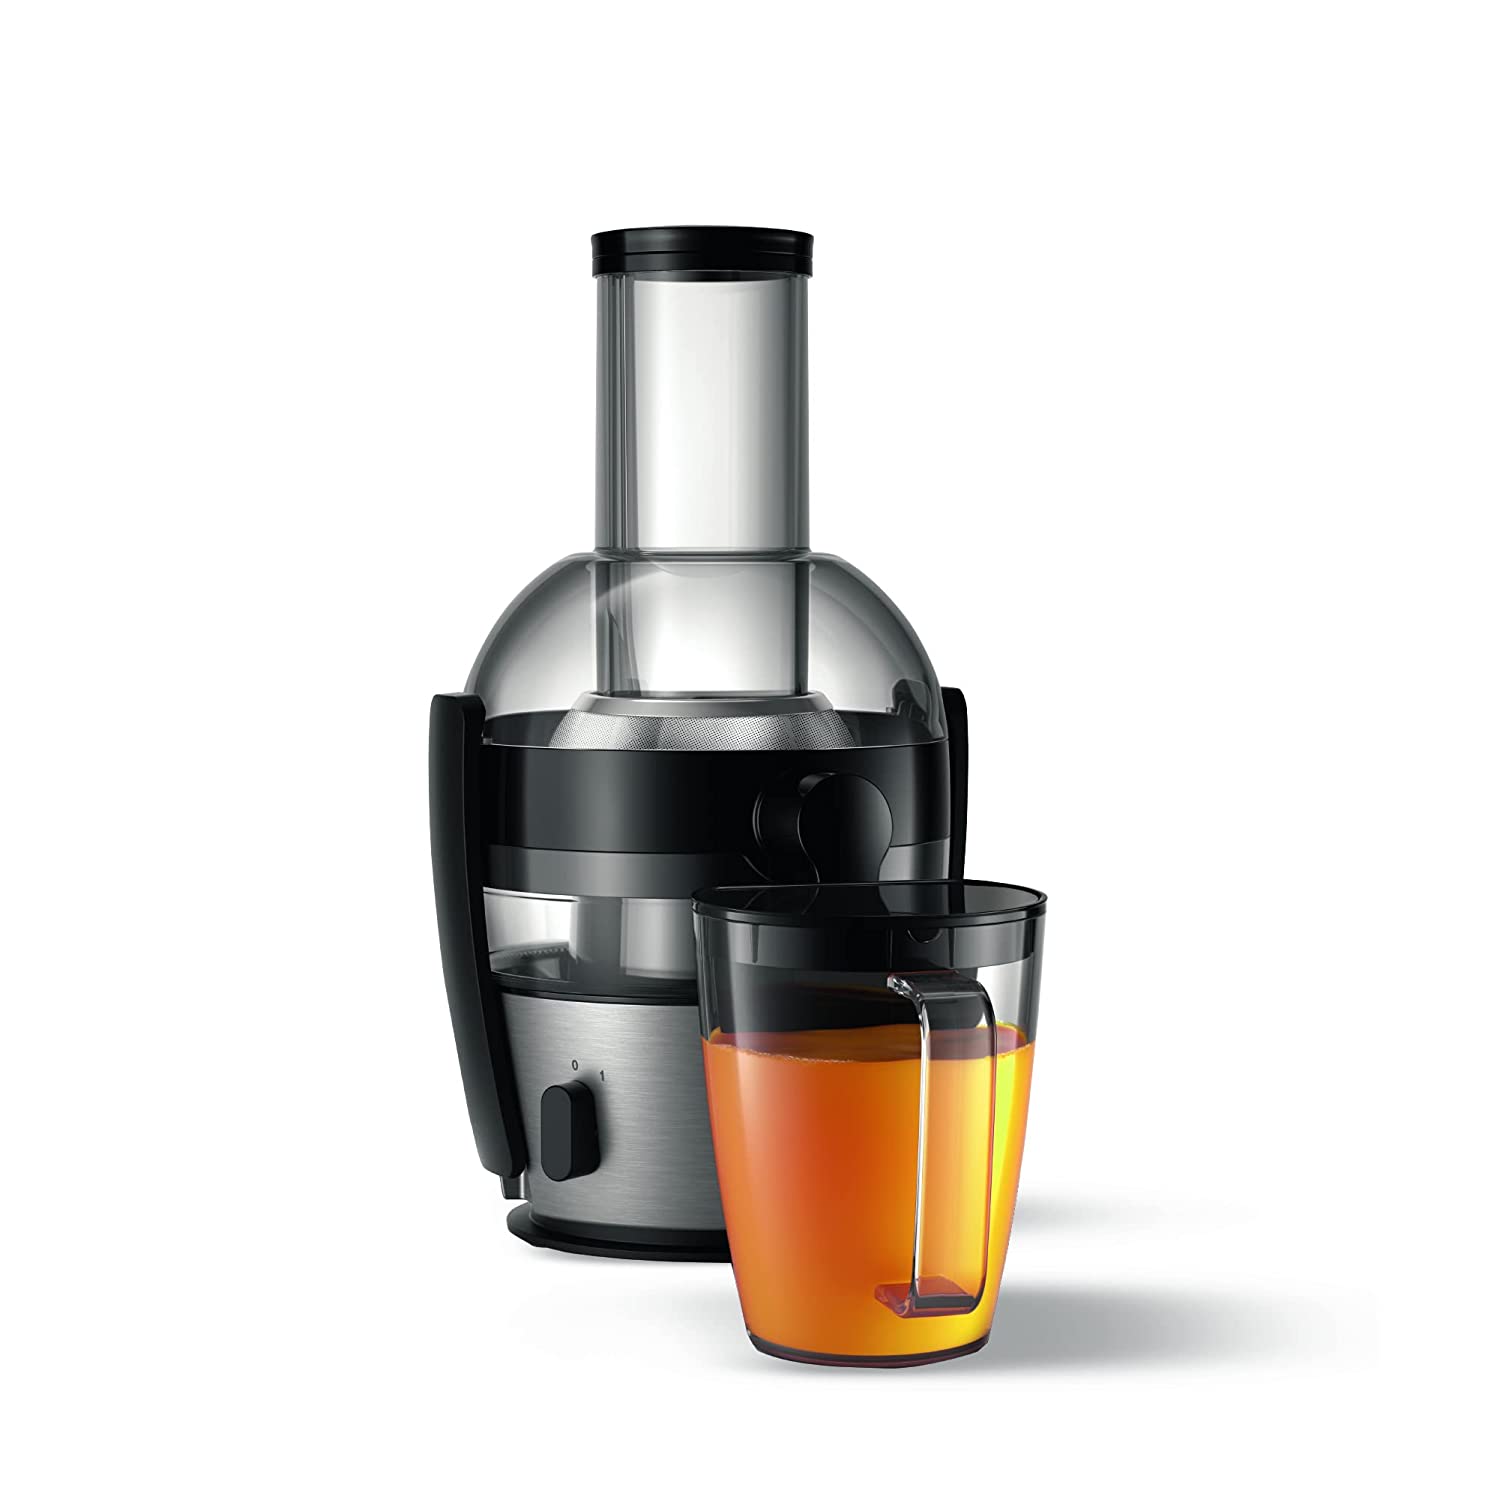 Philips-Viva-Collection-2-Litre-Juicer